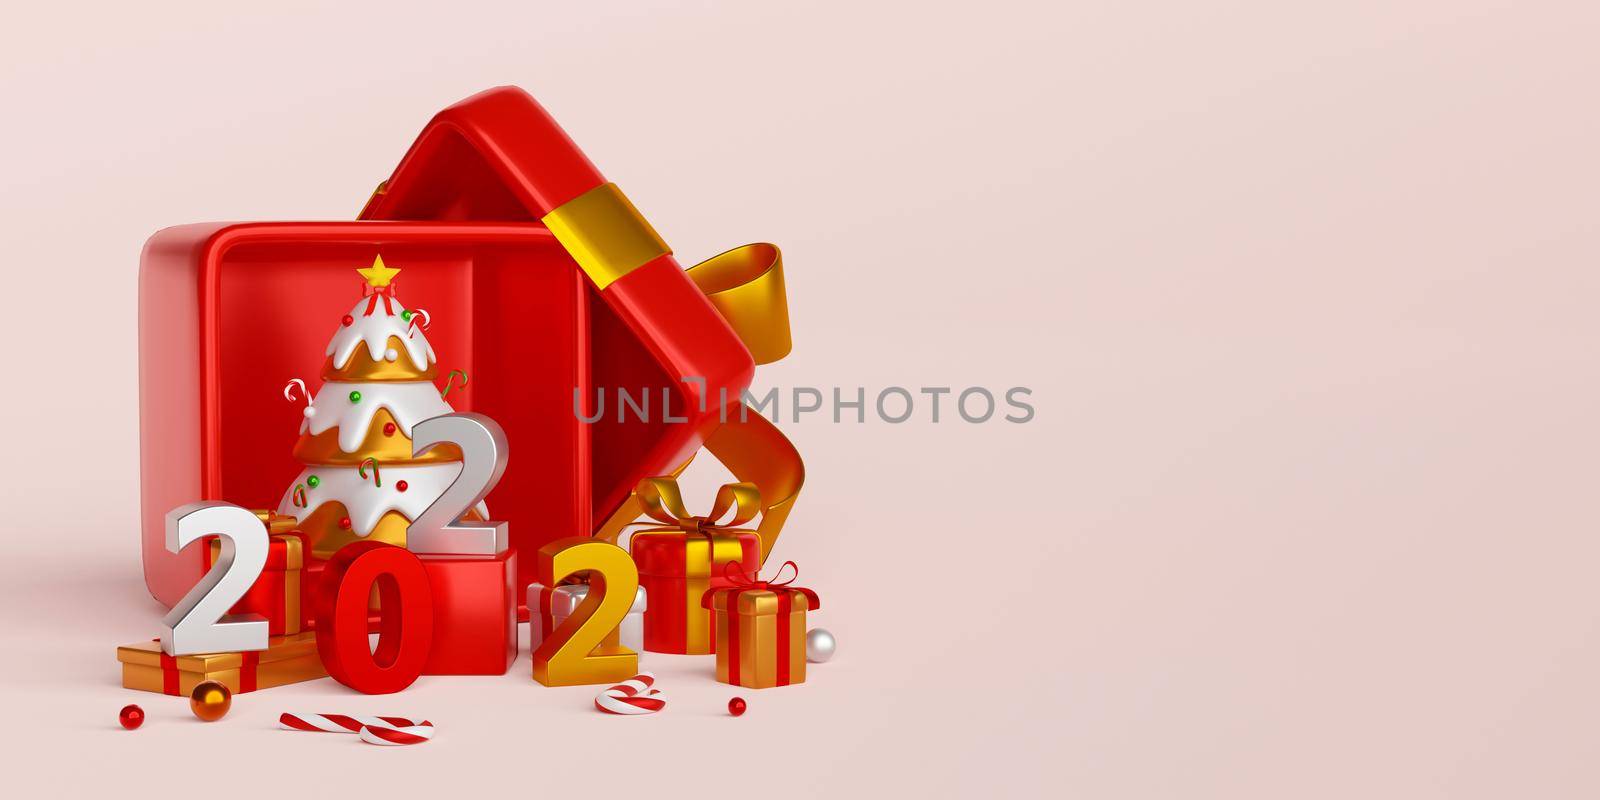 Merry Christmas and Happy New Year, Christmas tree in gift box with Christmas ornament, 3d illustration